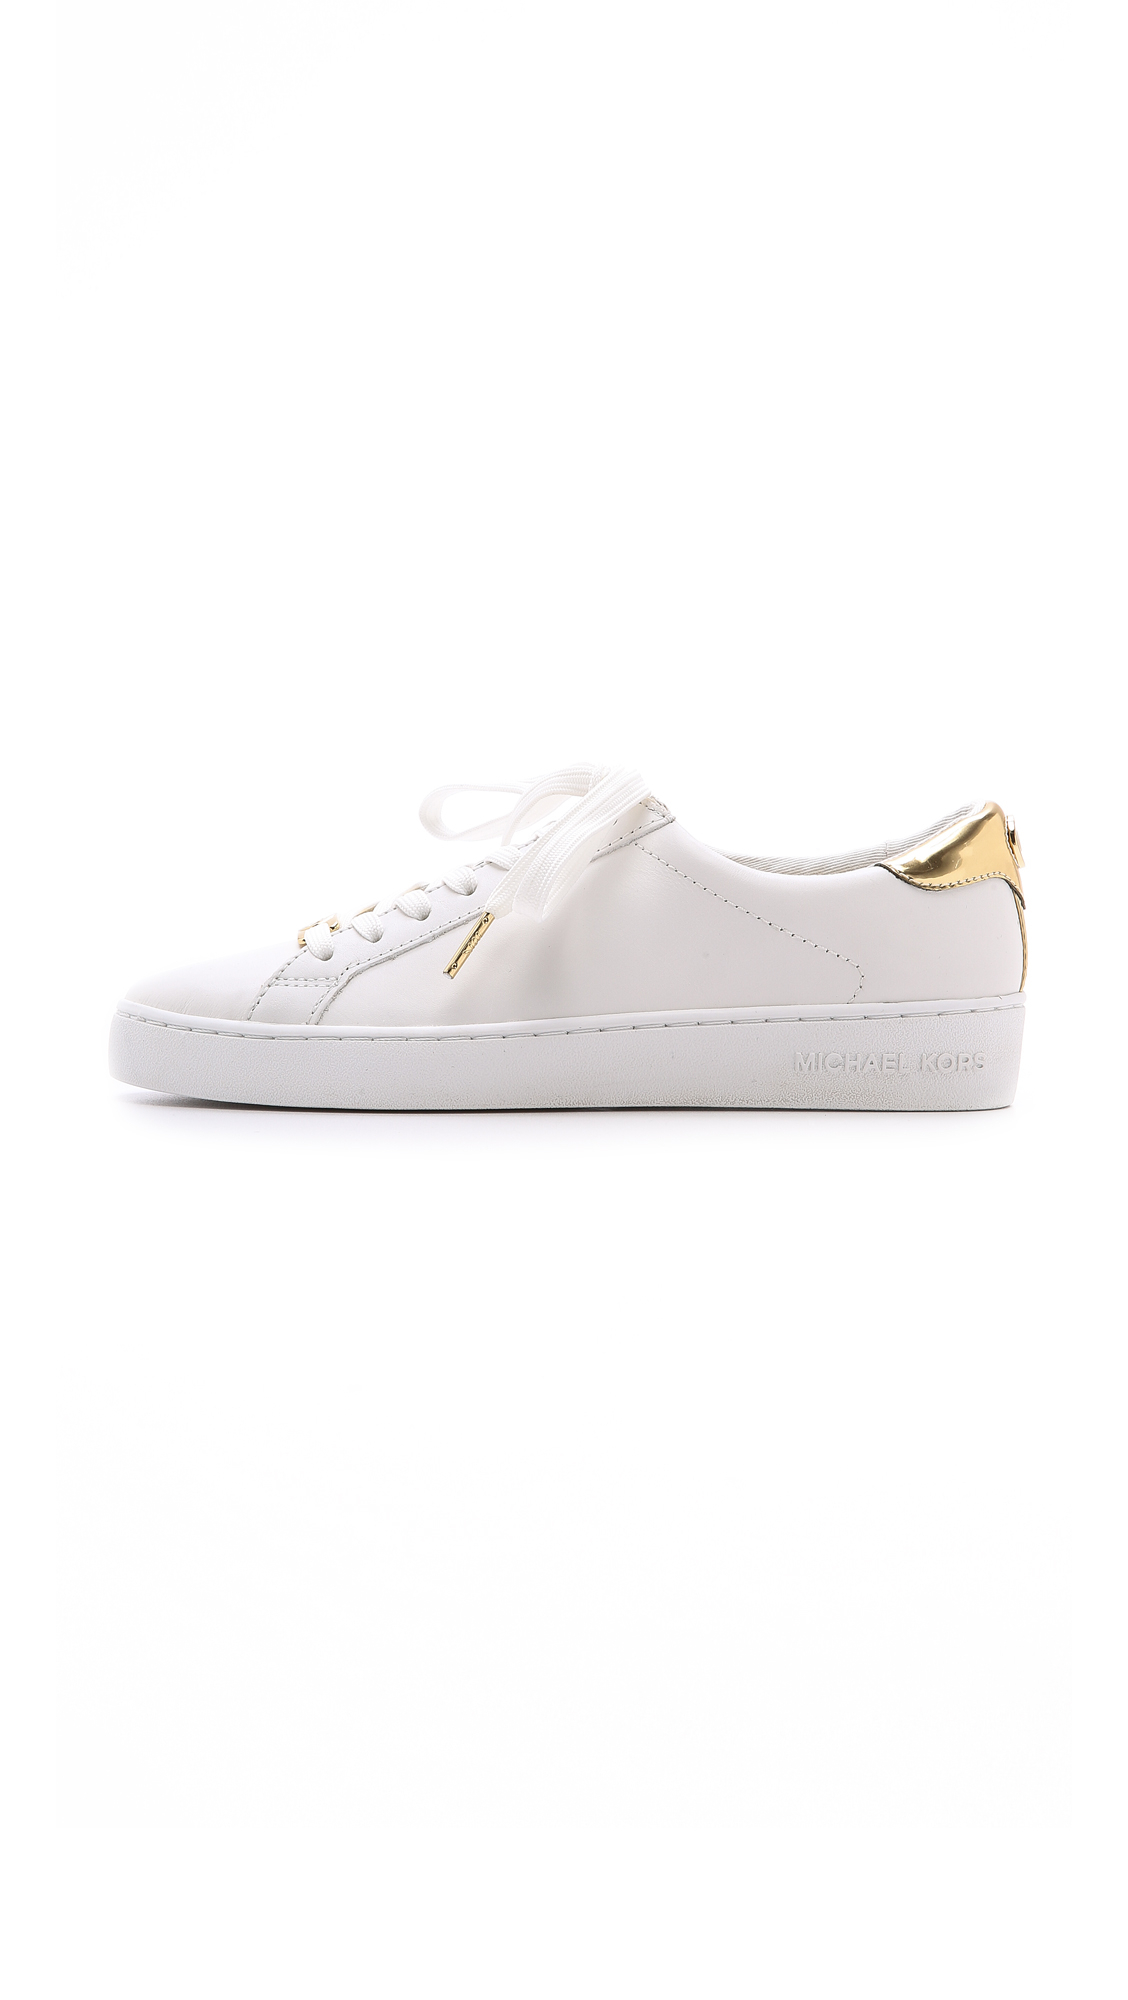 Tijdreeksen snap Zakenman MICHAEL Michael Kors Irving Lace Up Sneakers - Optic/Pale Gold in White |  Lyst